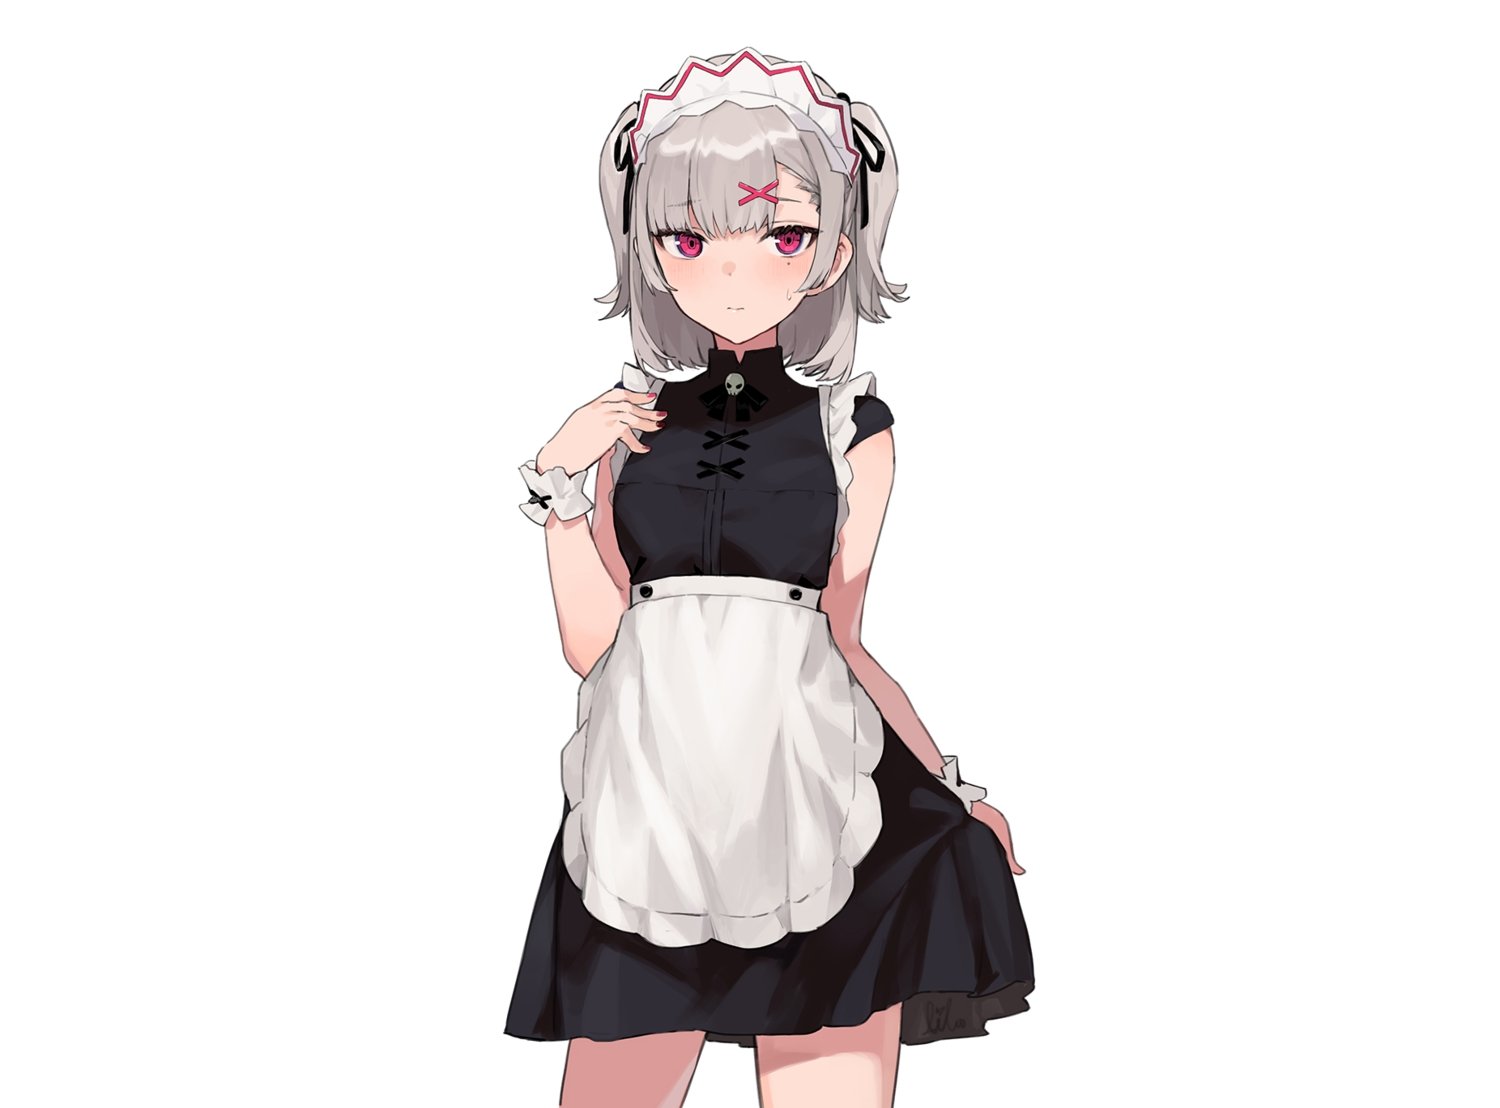 Anime Maid Outfit Matching Pfp.